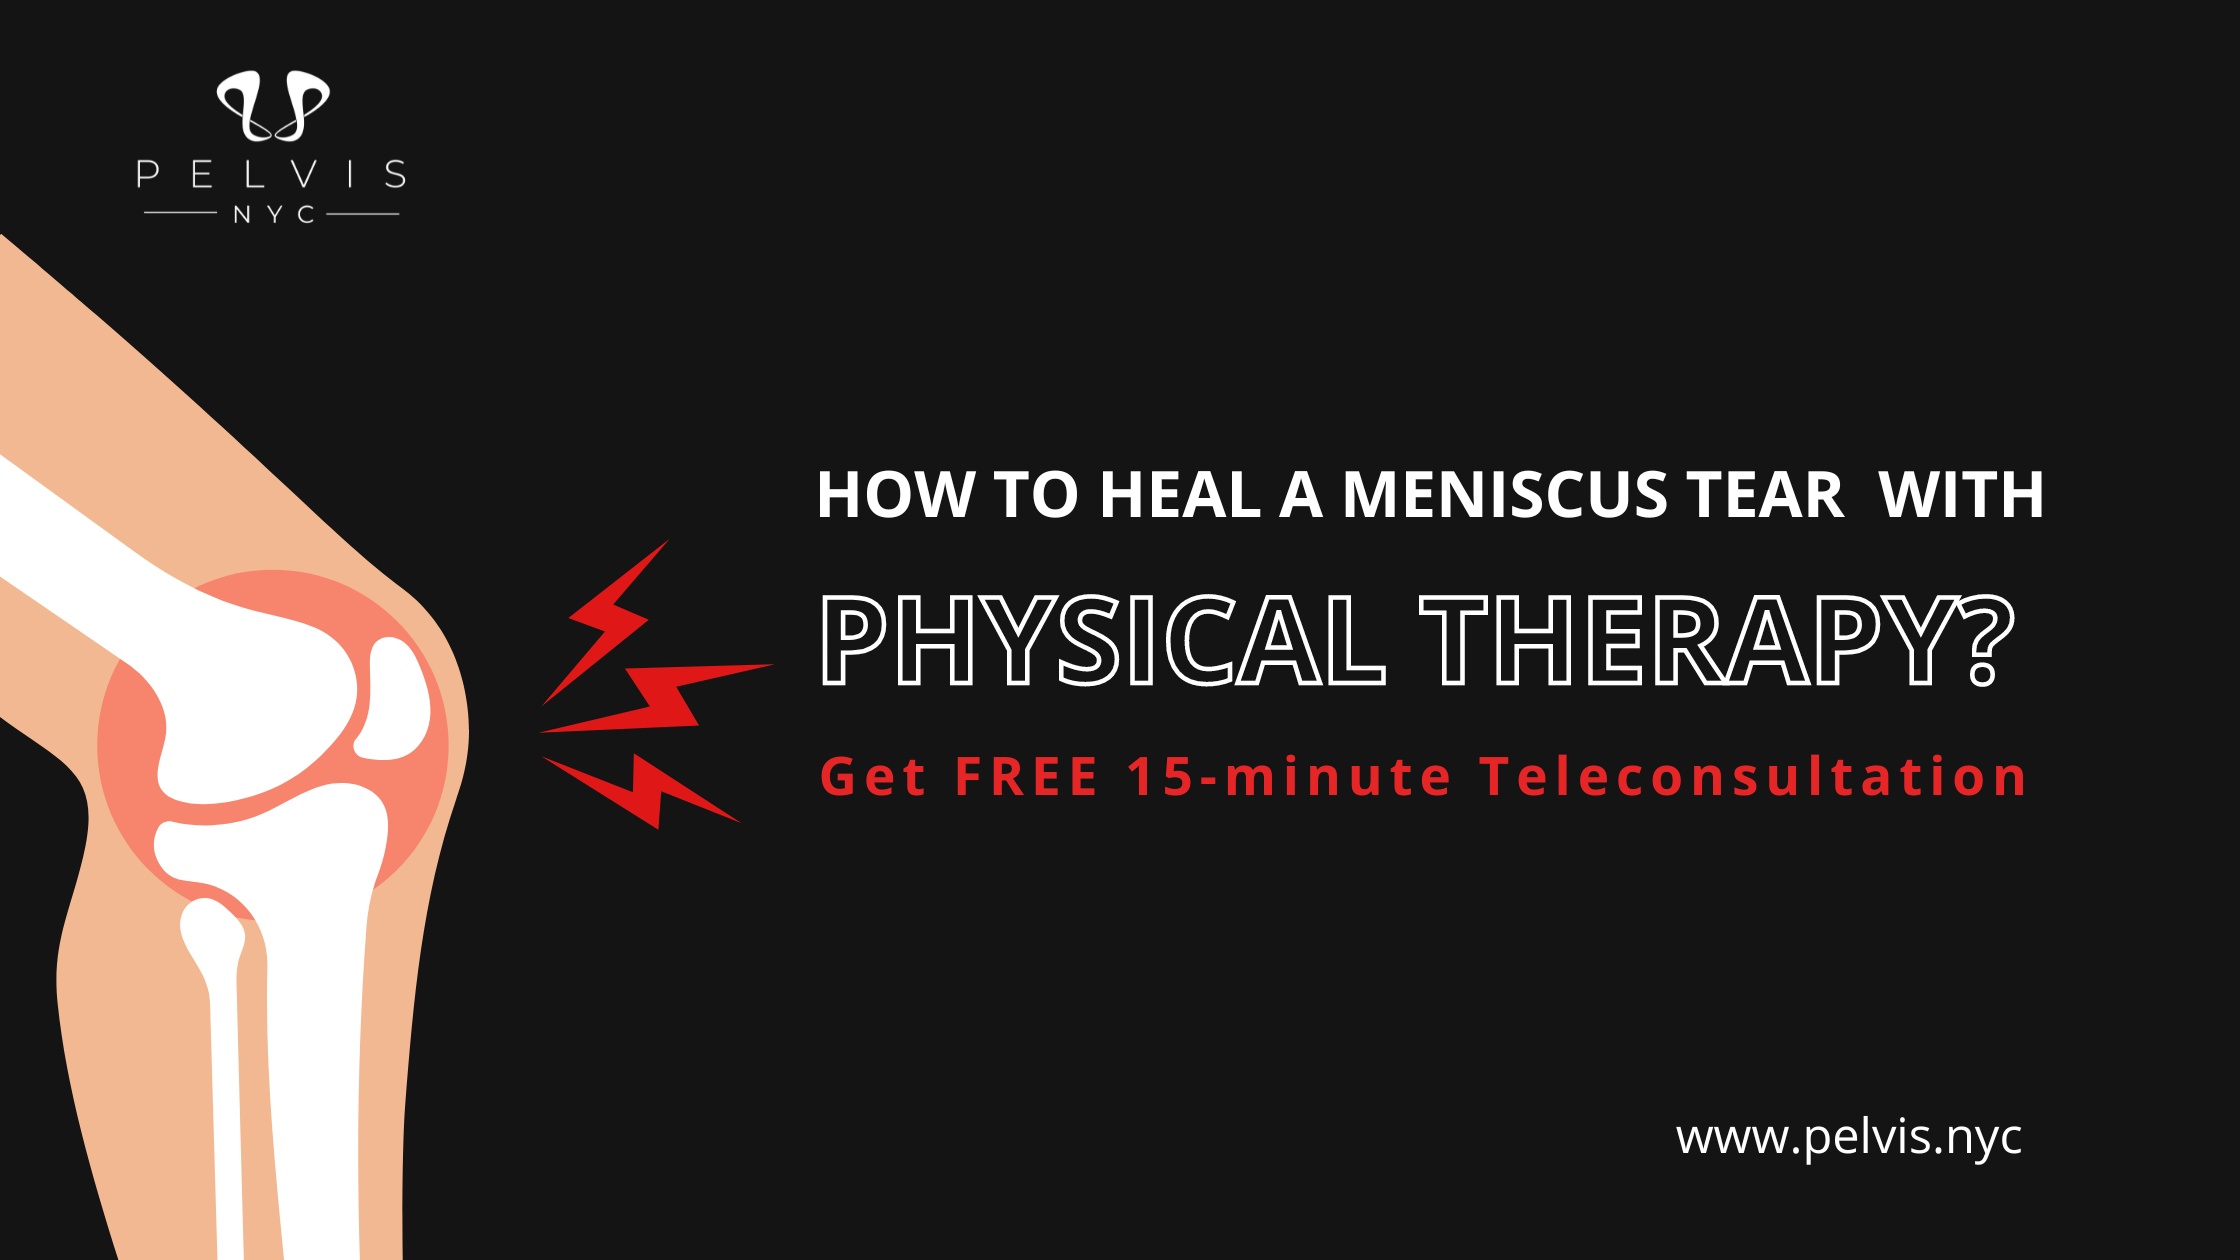 Meniscus Tear Treatment: Reach Out To A Physiotherapist